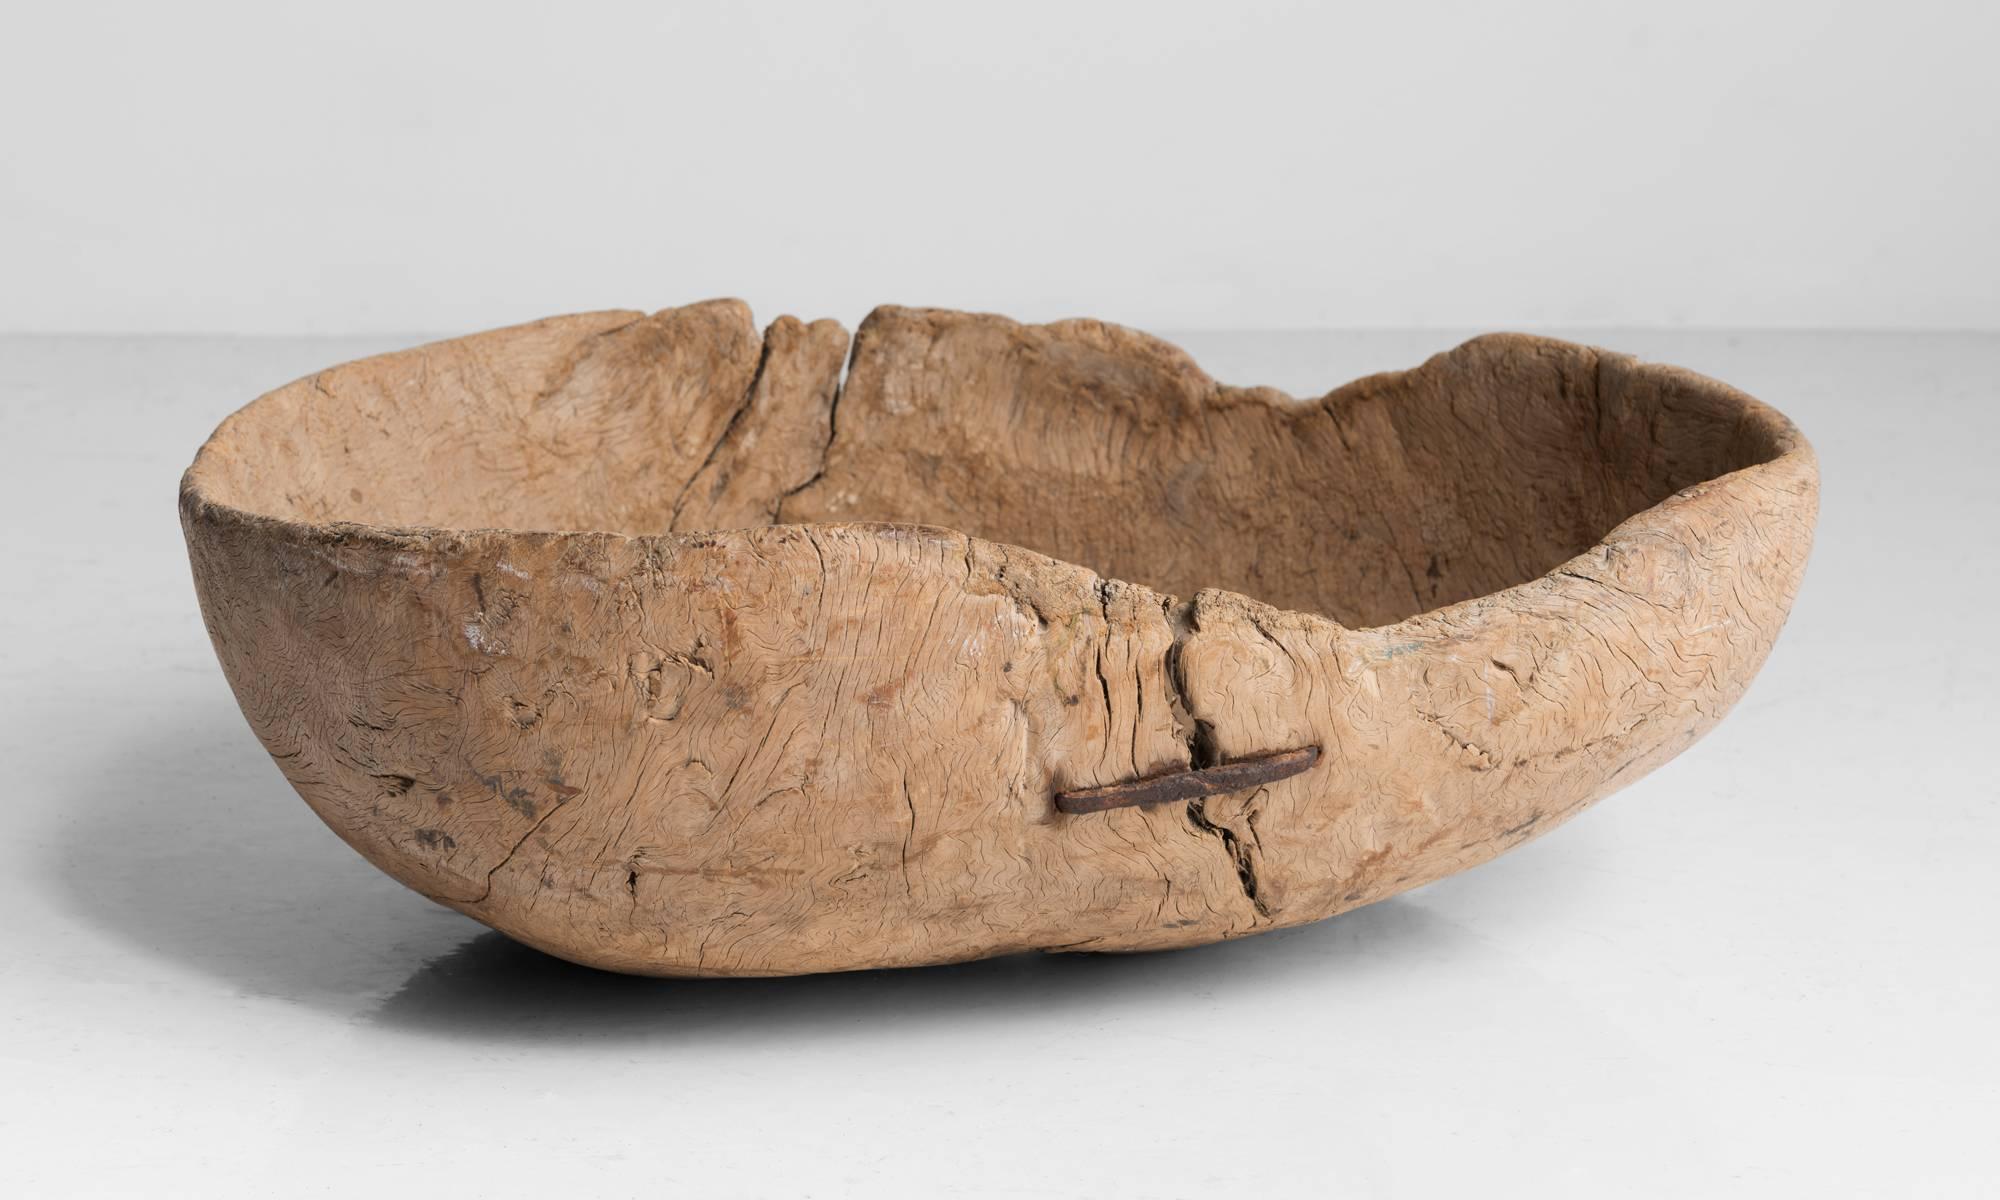 Primitive root bowl, Sweden, circa 1790.

Large sized root-wood bowl with primitive mending.

Measures: 20